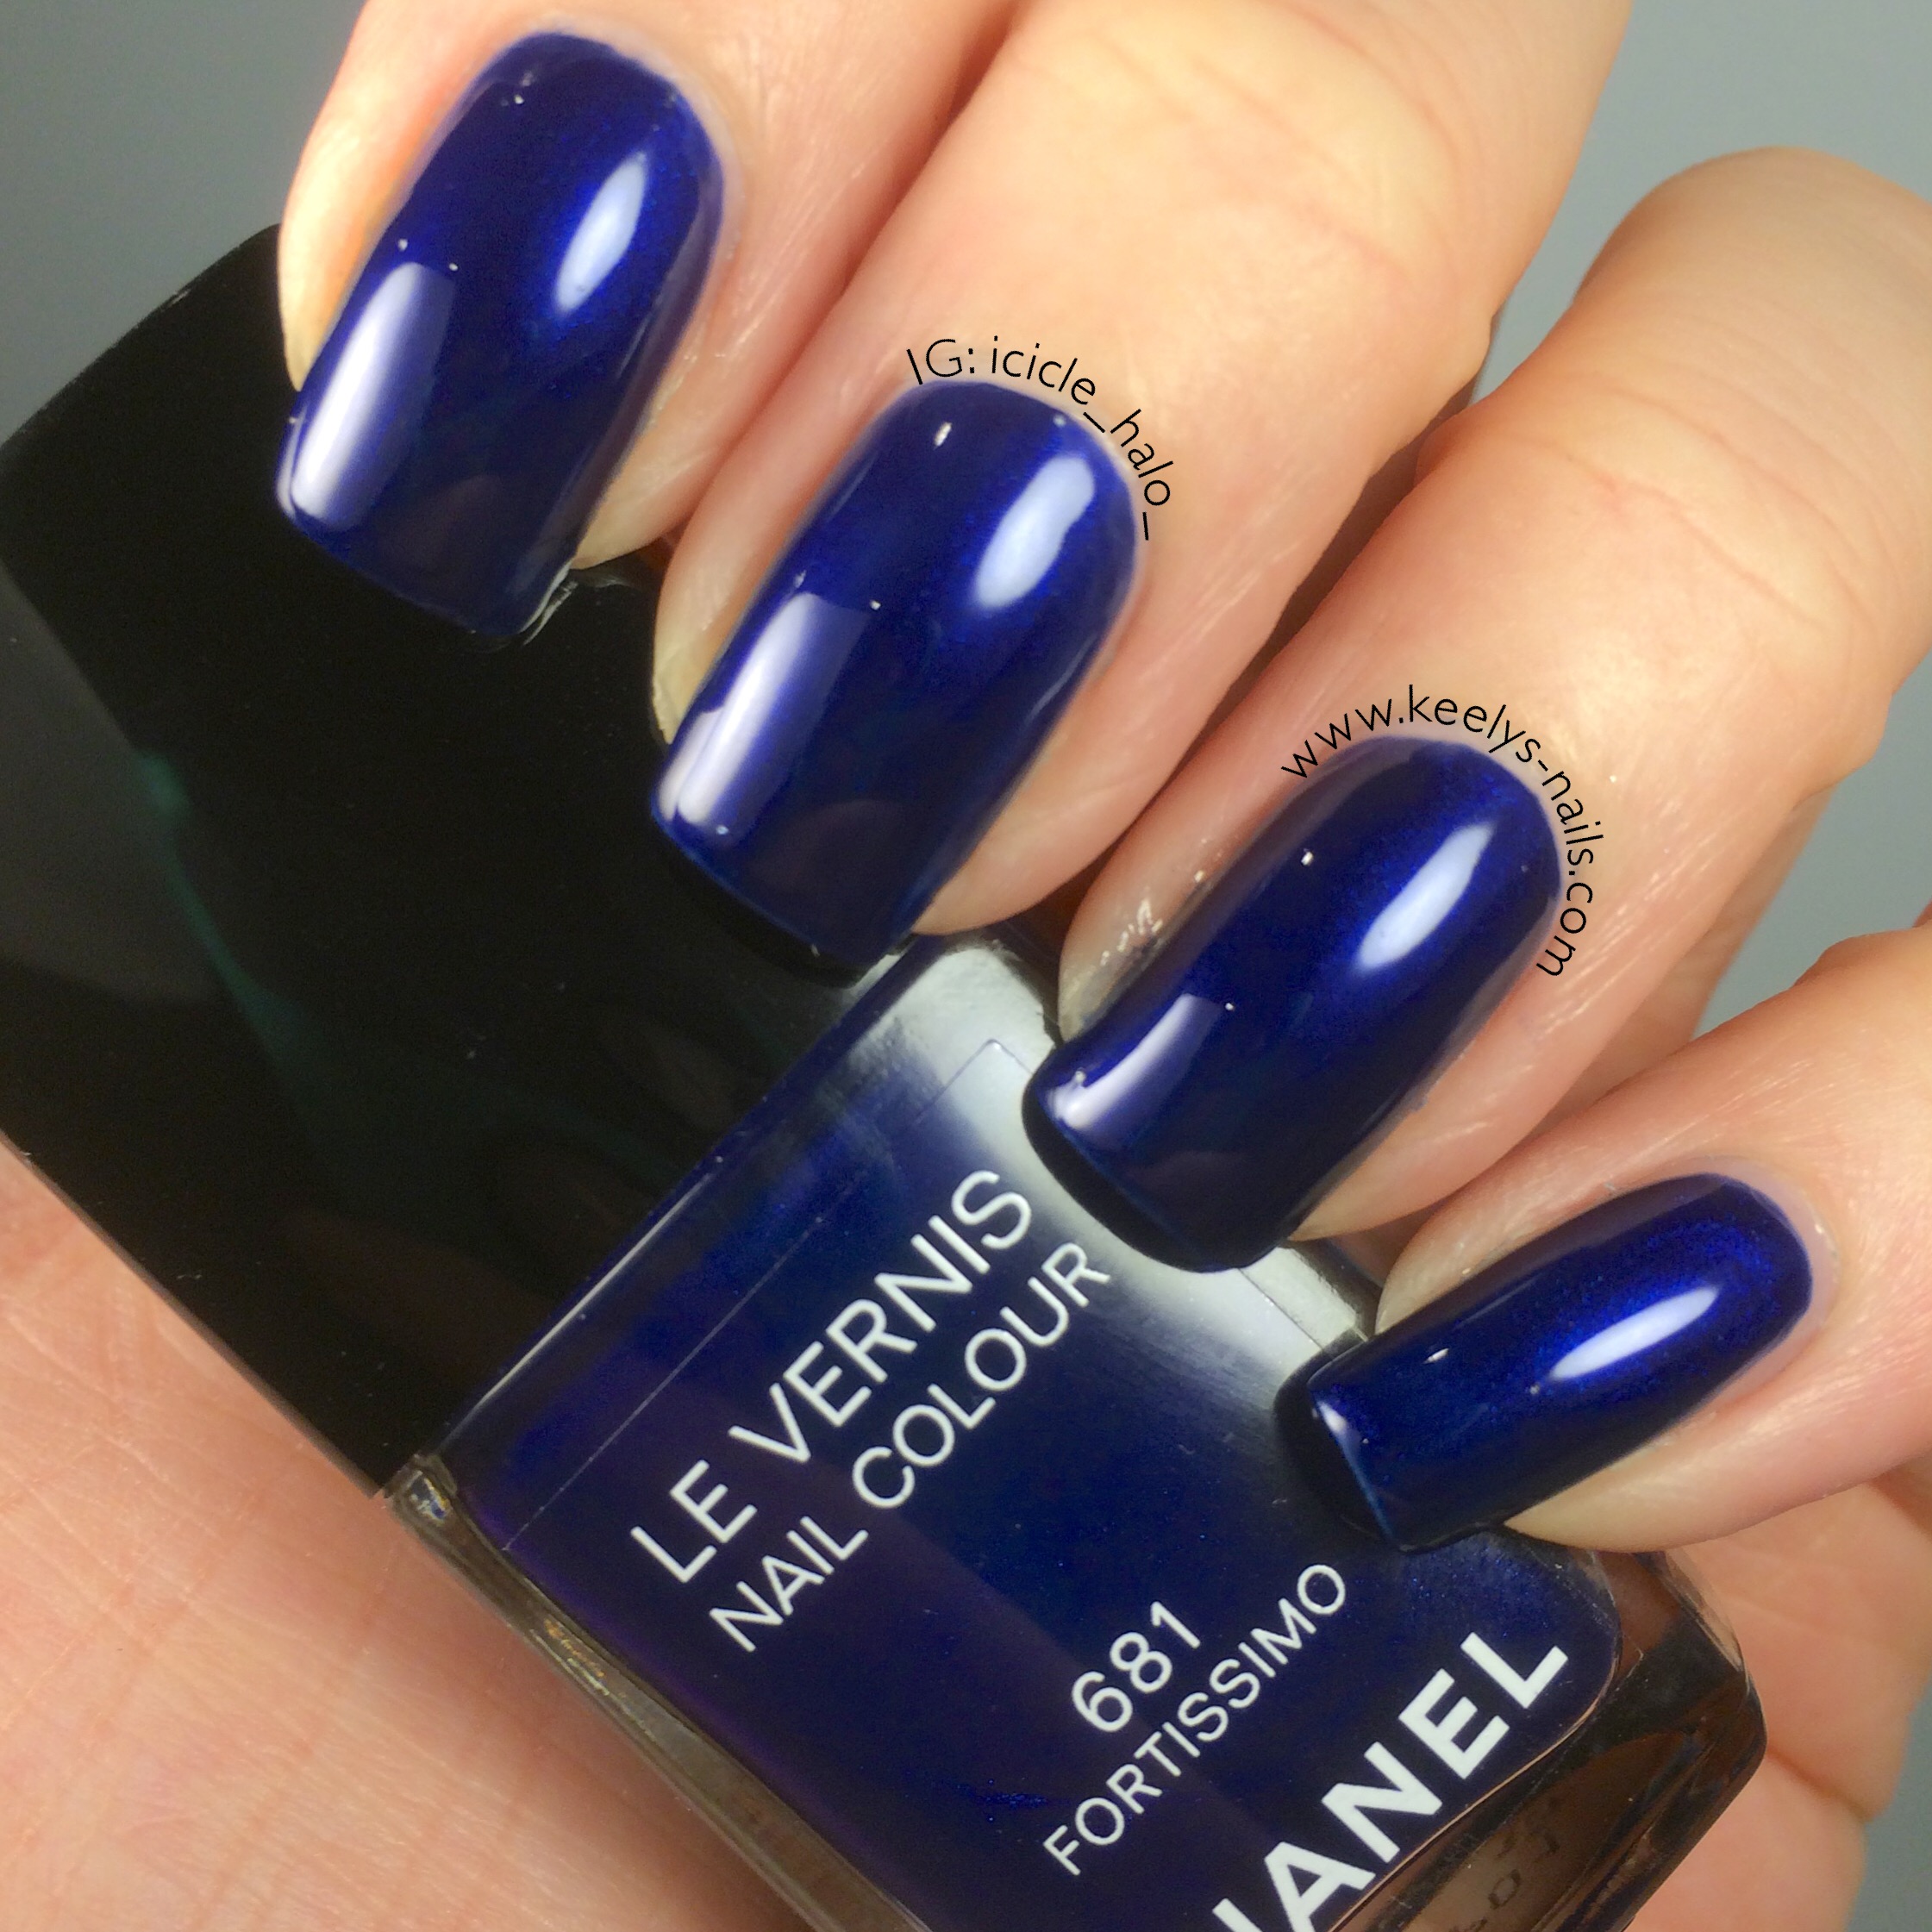 Chanel Fortissimo 681 swatch | Keely's Nails